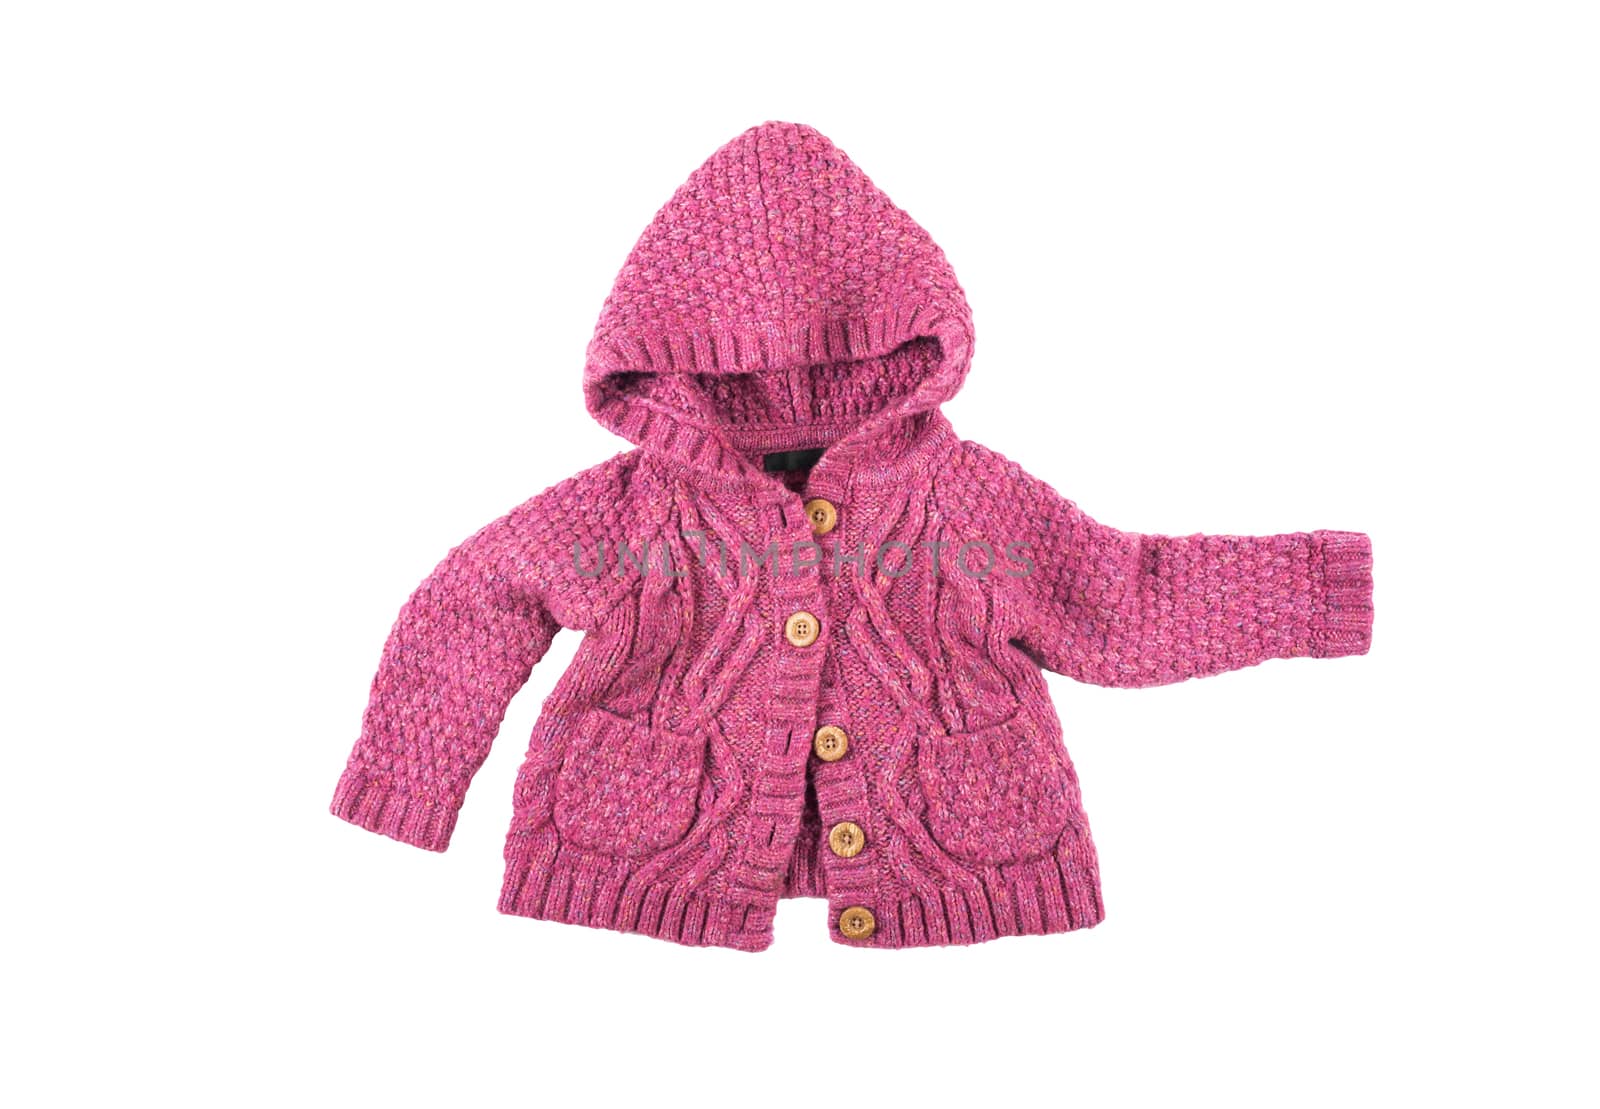 Baby warm knitted woolen pink sweater with buttons and hood